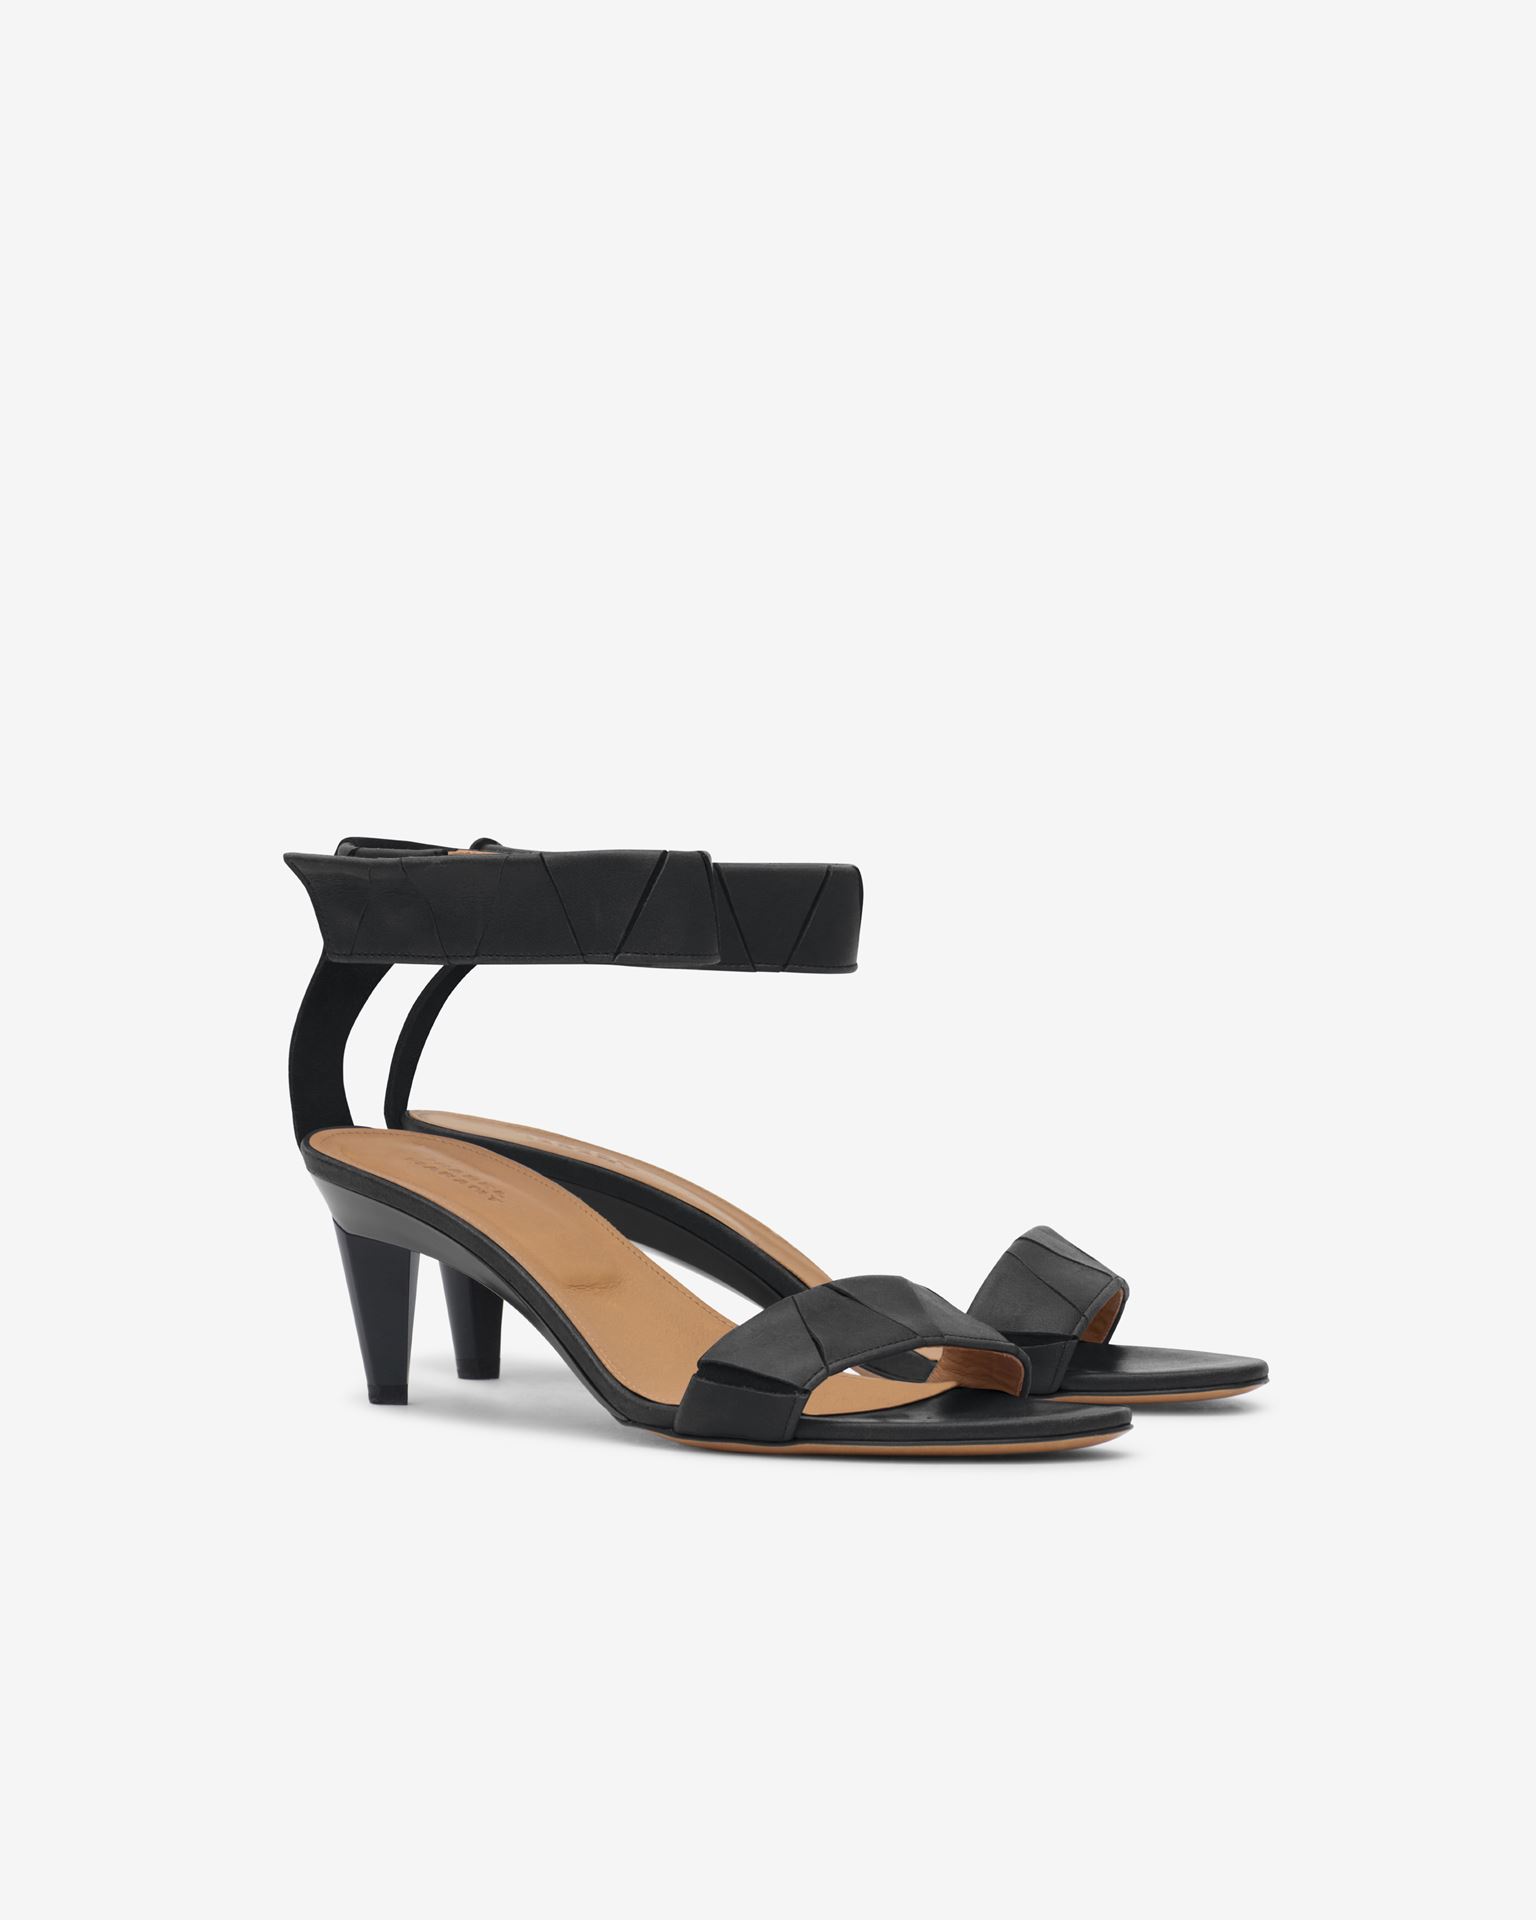 Isabel Marant, Arely Leather Sandals - Women - Black